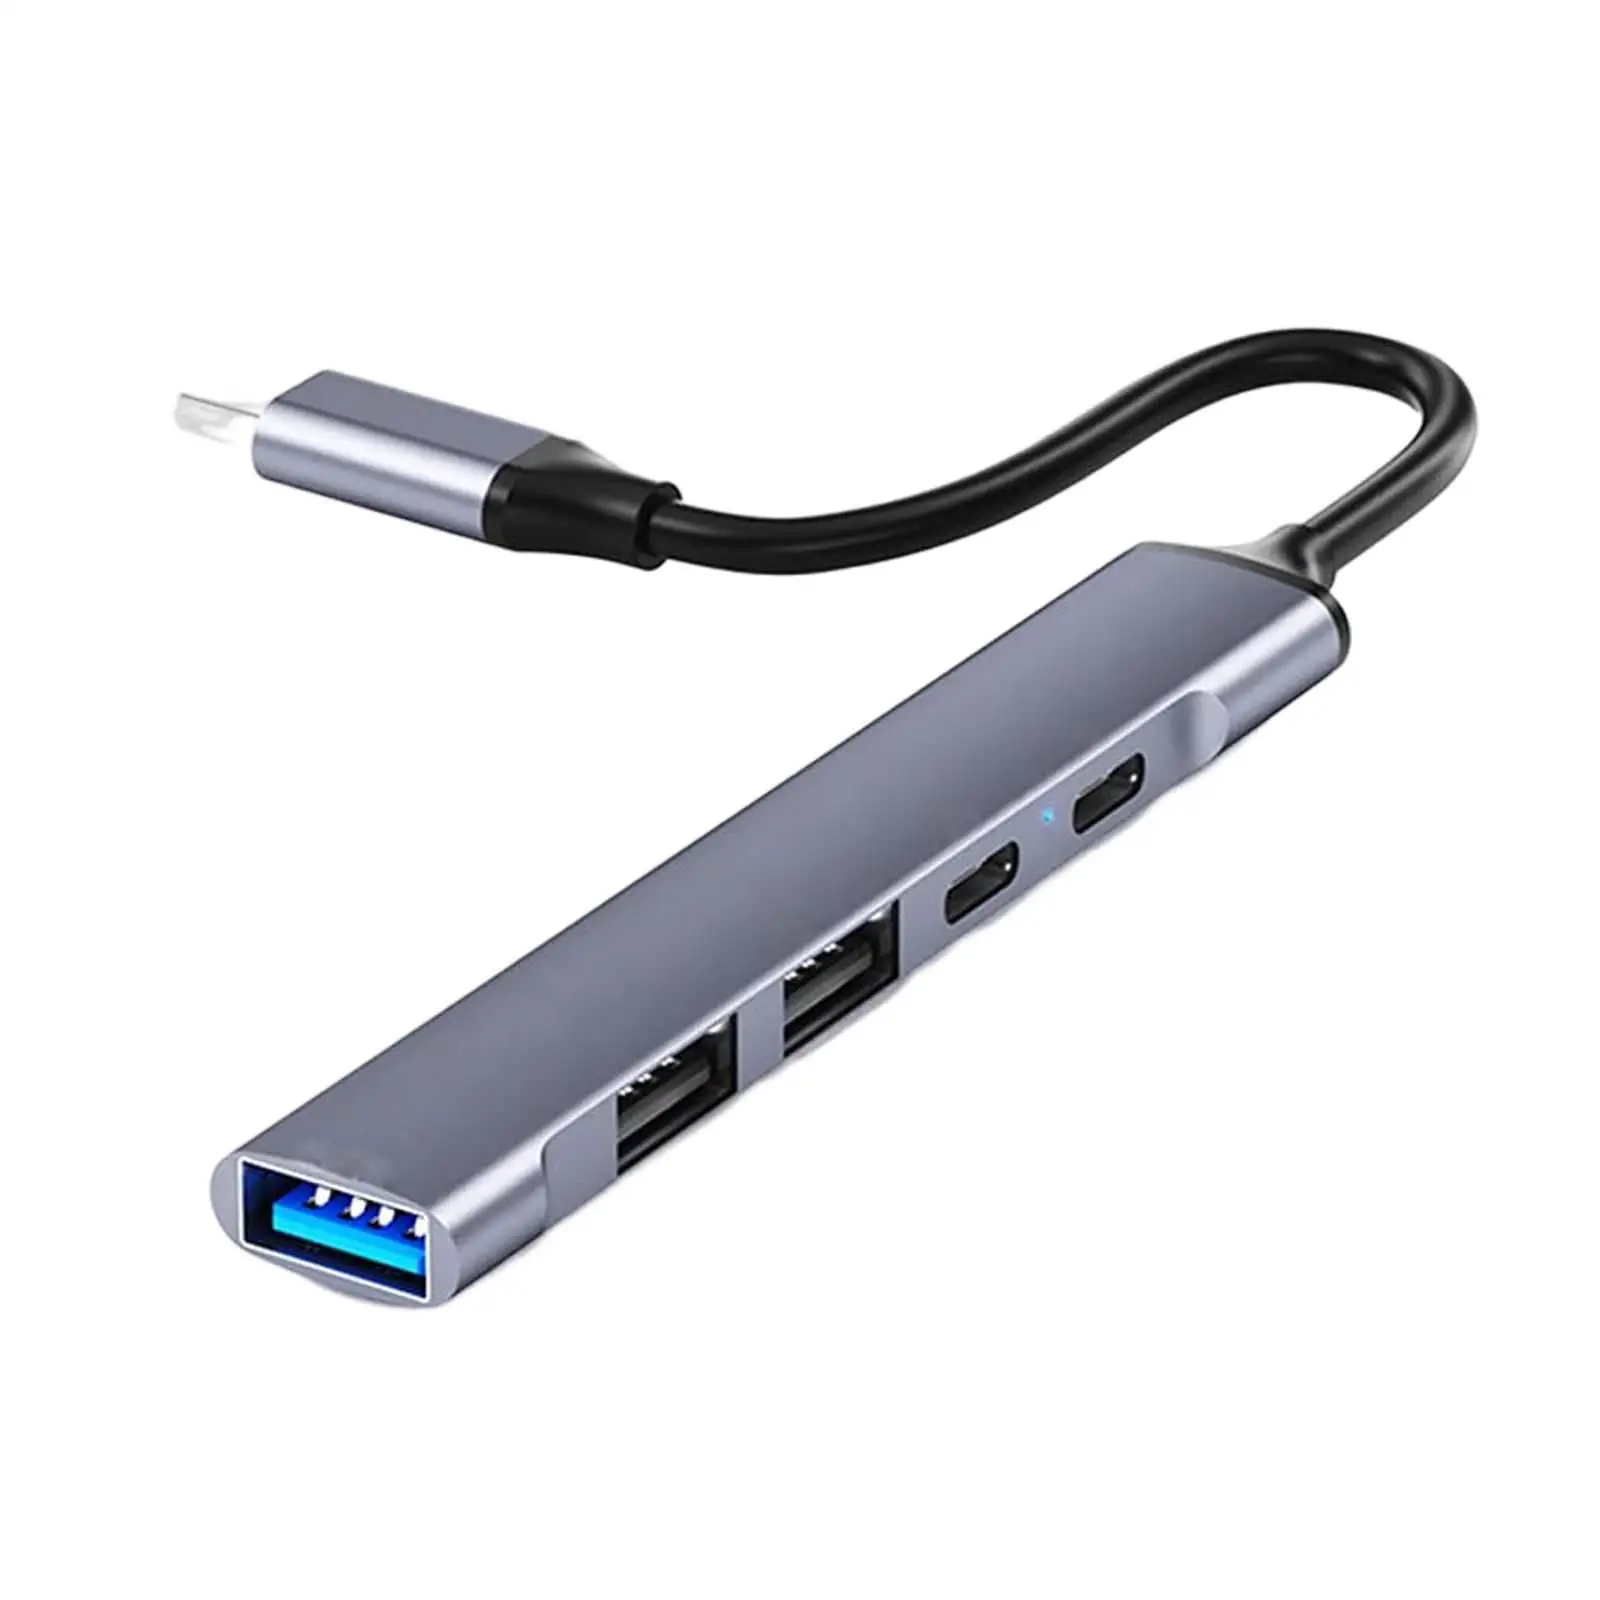 Portable USB Hub PD Fast Charging Data Transfer USB 3.0 5Gbps Converter Docking Station Multiports Adapter for Type C Devices